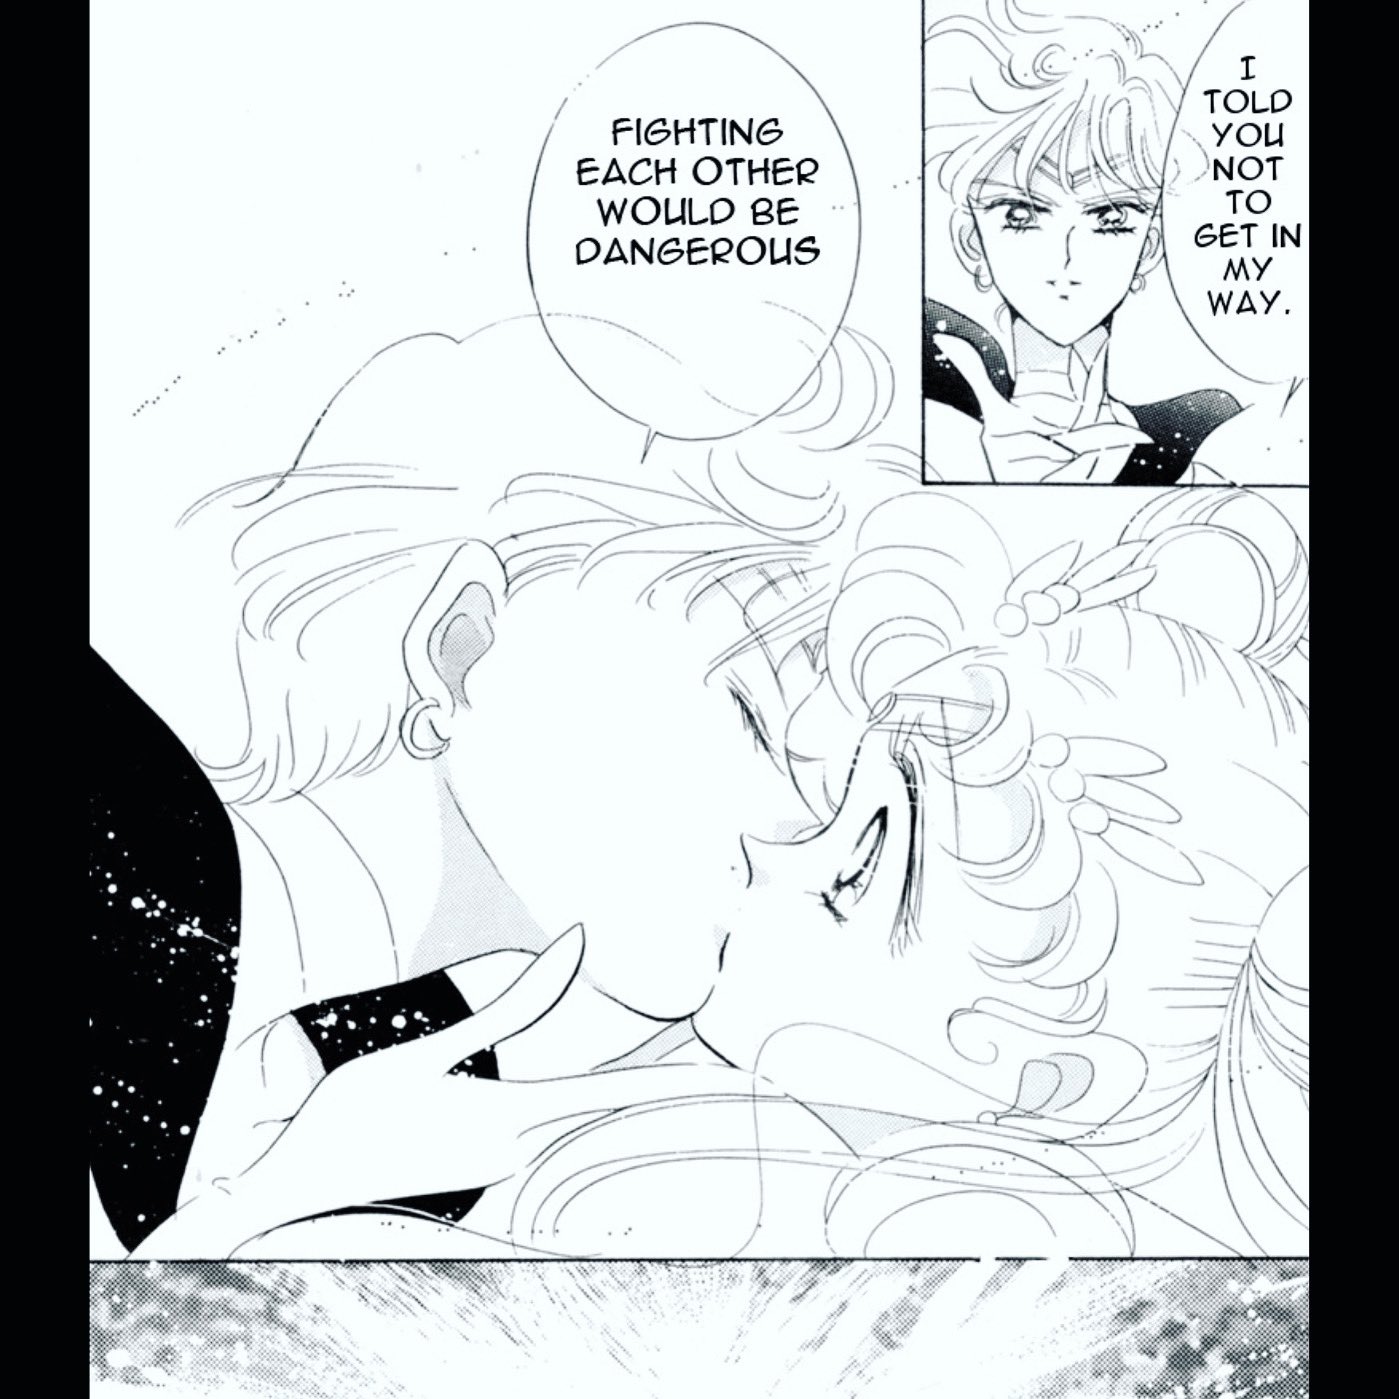 Sailor Manga Ar Twitter Moments From Act 29 Why Is Haruka So Hot And Why Are We Both Hot And Bothered By This Kiss With Usagi Sailormoon Sailormanga T Co 6gplc5kp94 Twitter